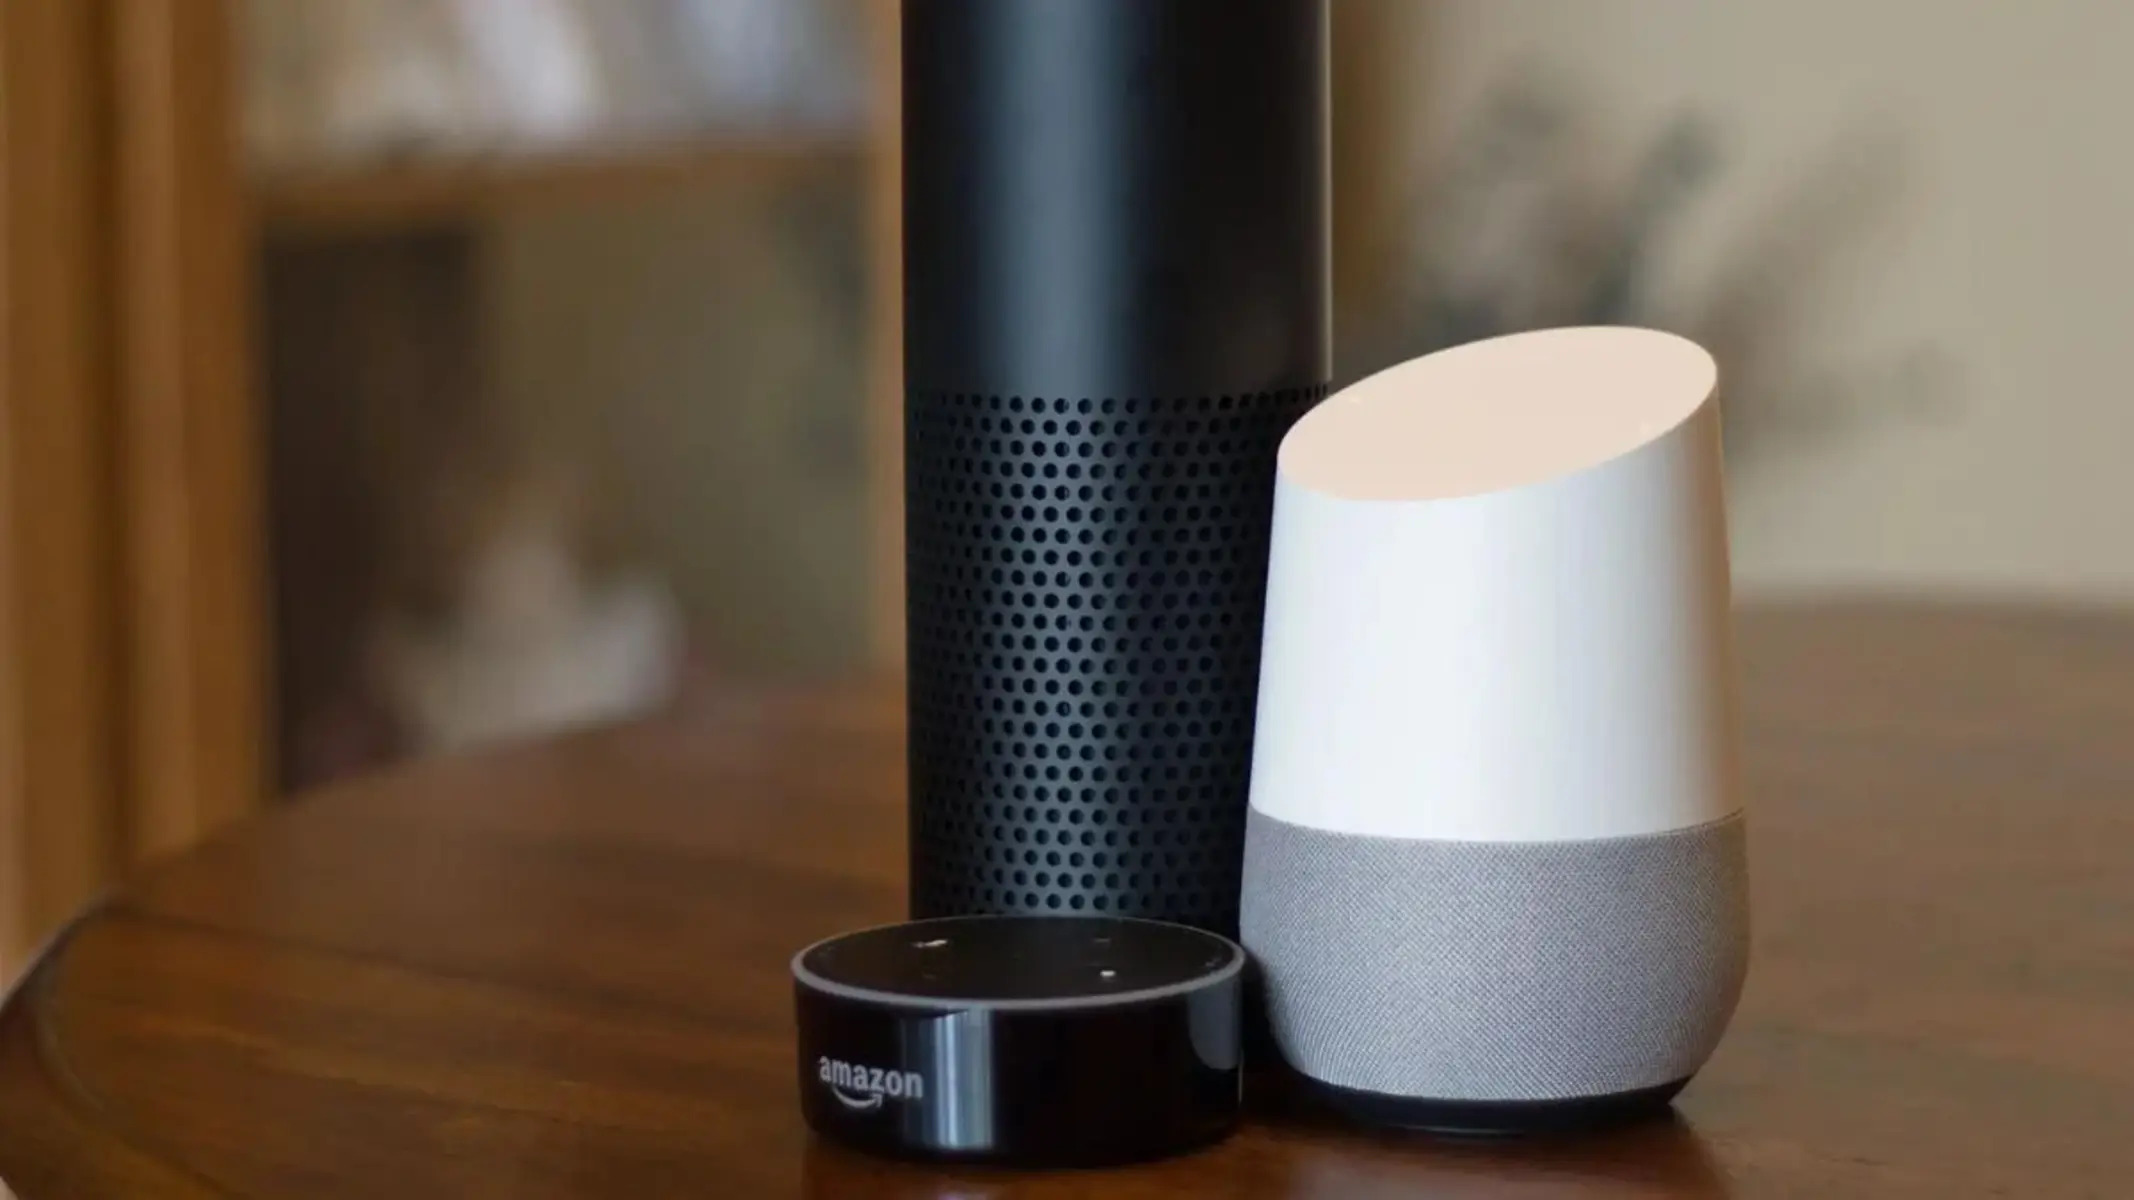 Can Google Home And Alexa Work Together?